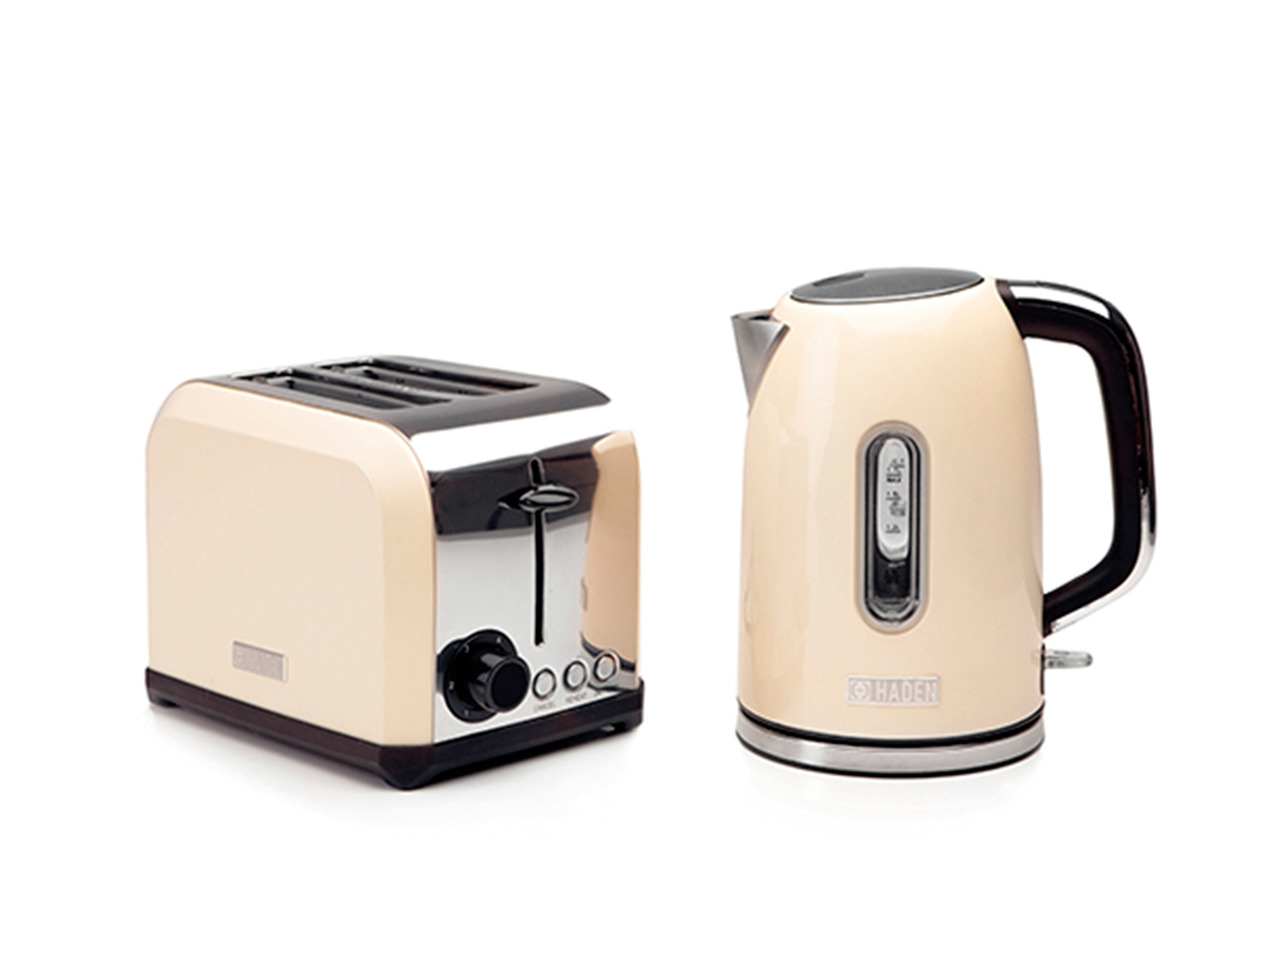 Haden Toaster and Kettle Set1